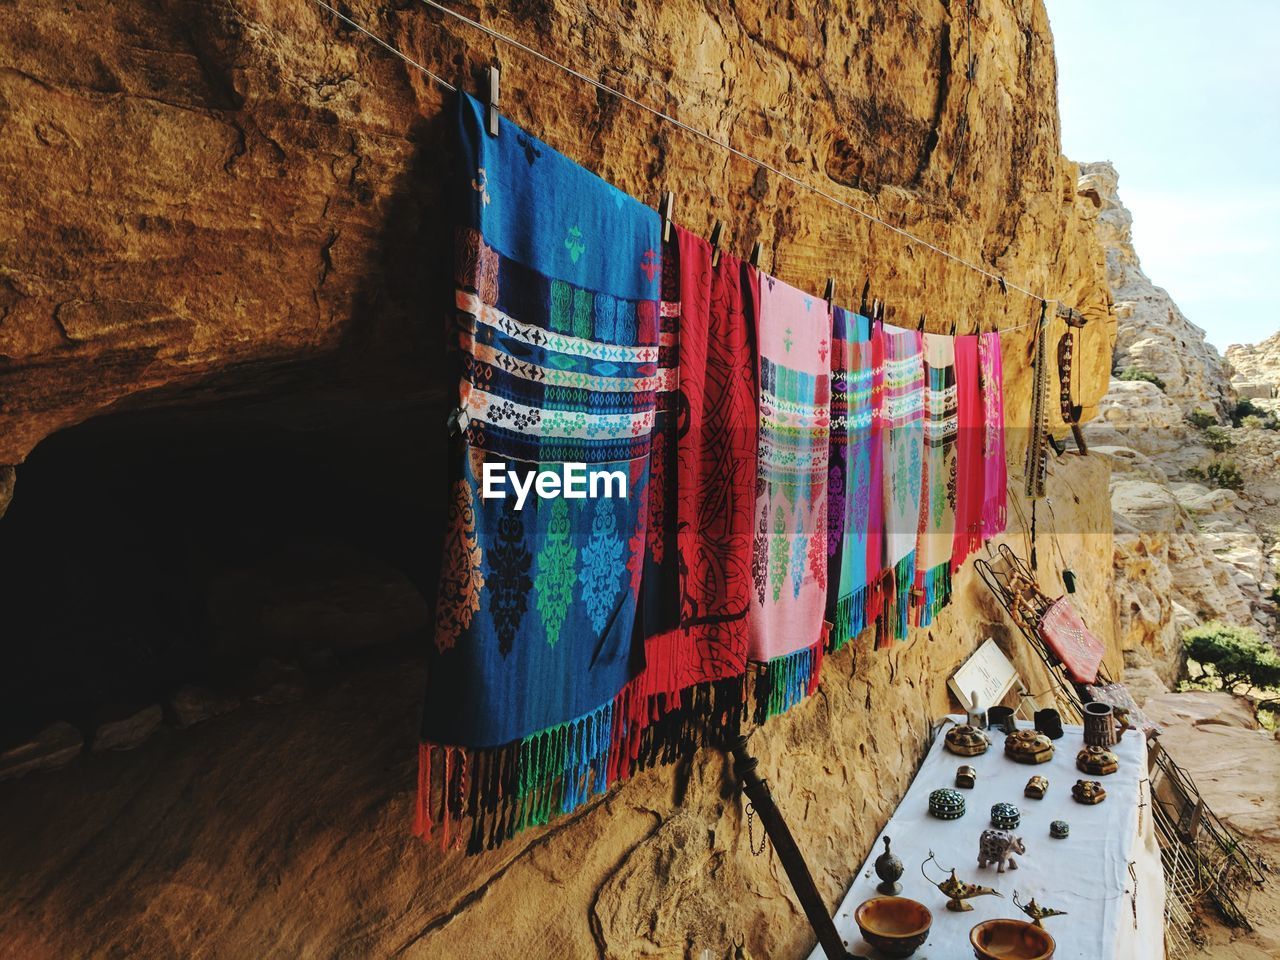 MULTI COLORED CLOTHES DRYING ON ROCK